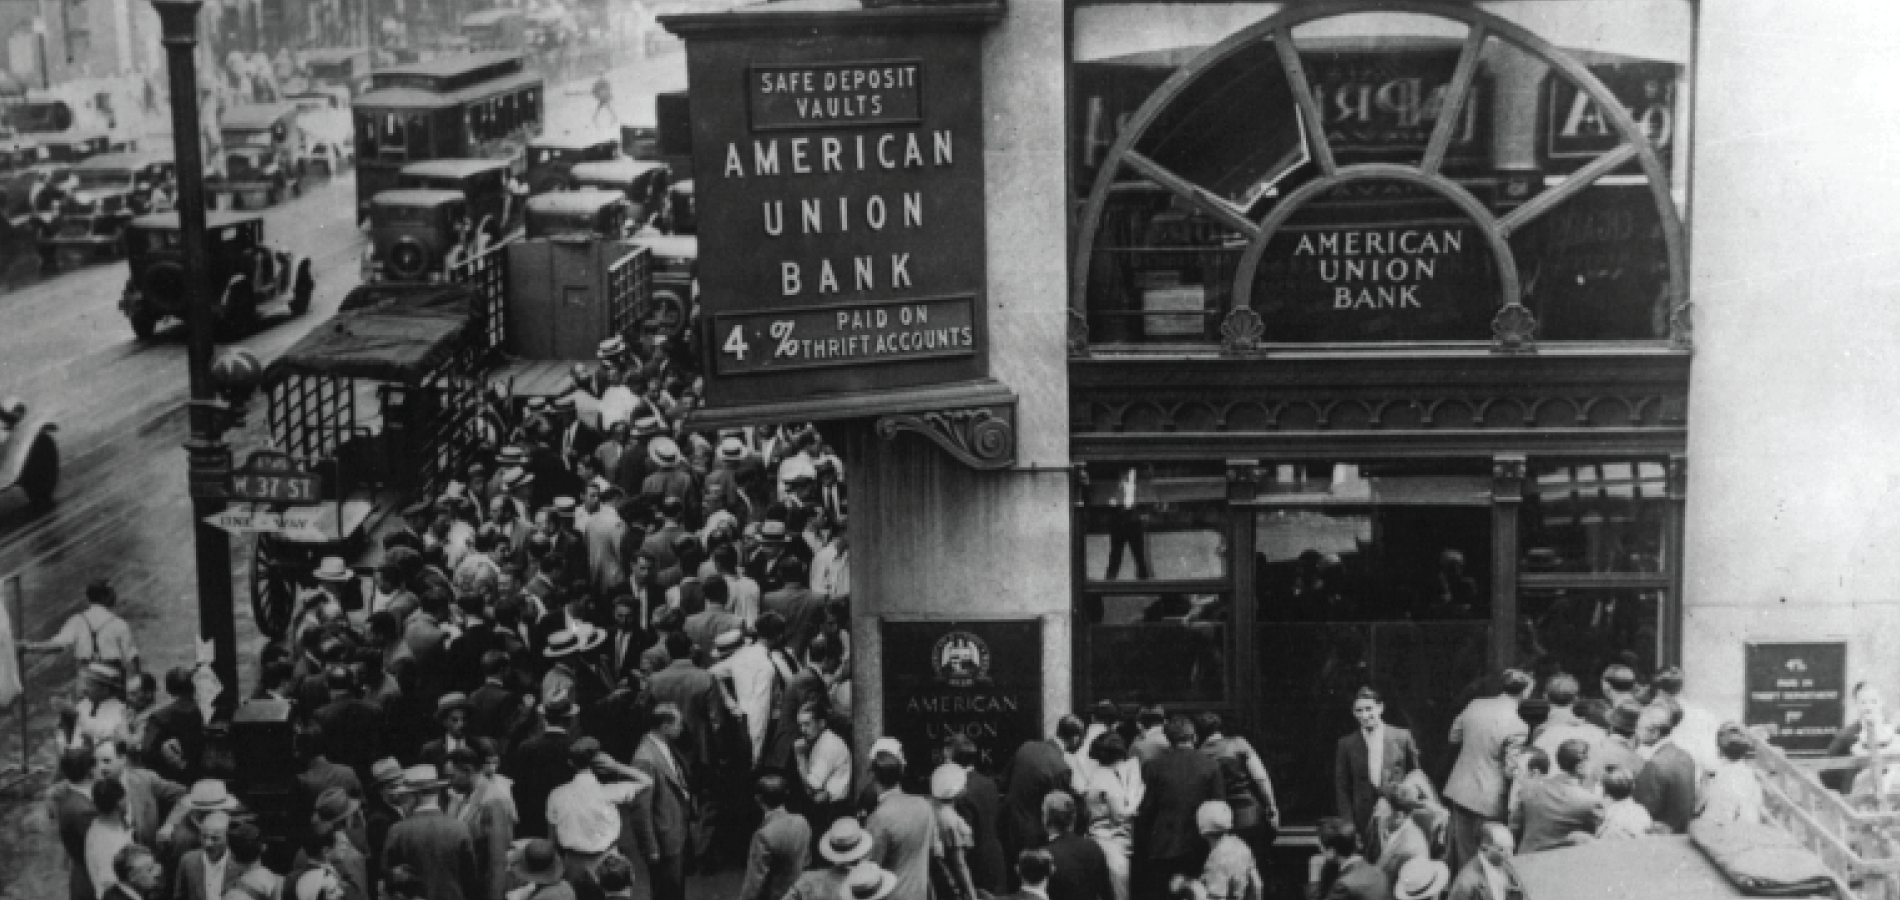 Crowd at New York's American Union Bank during Great Depression